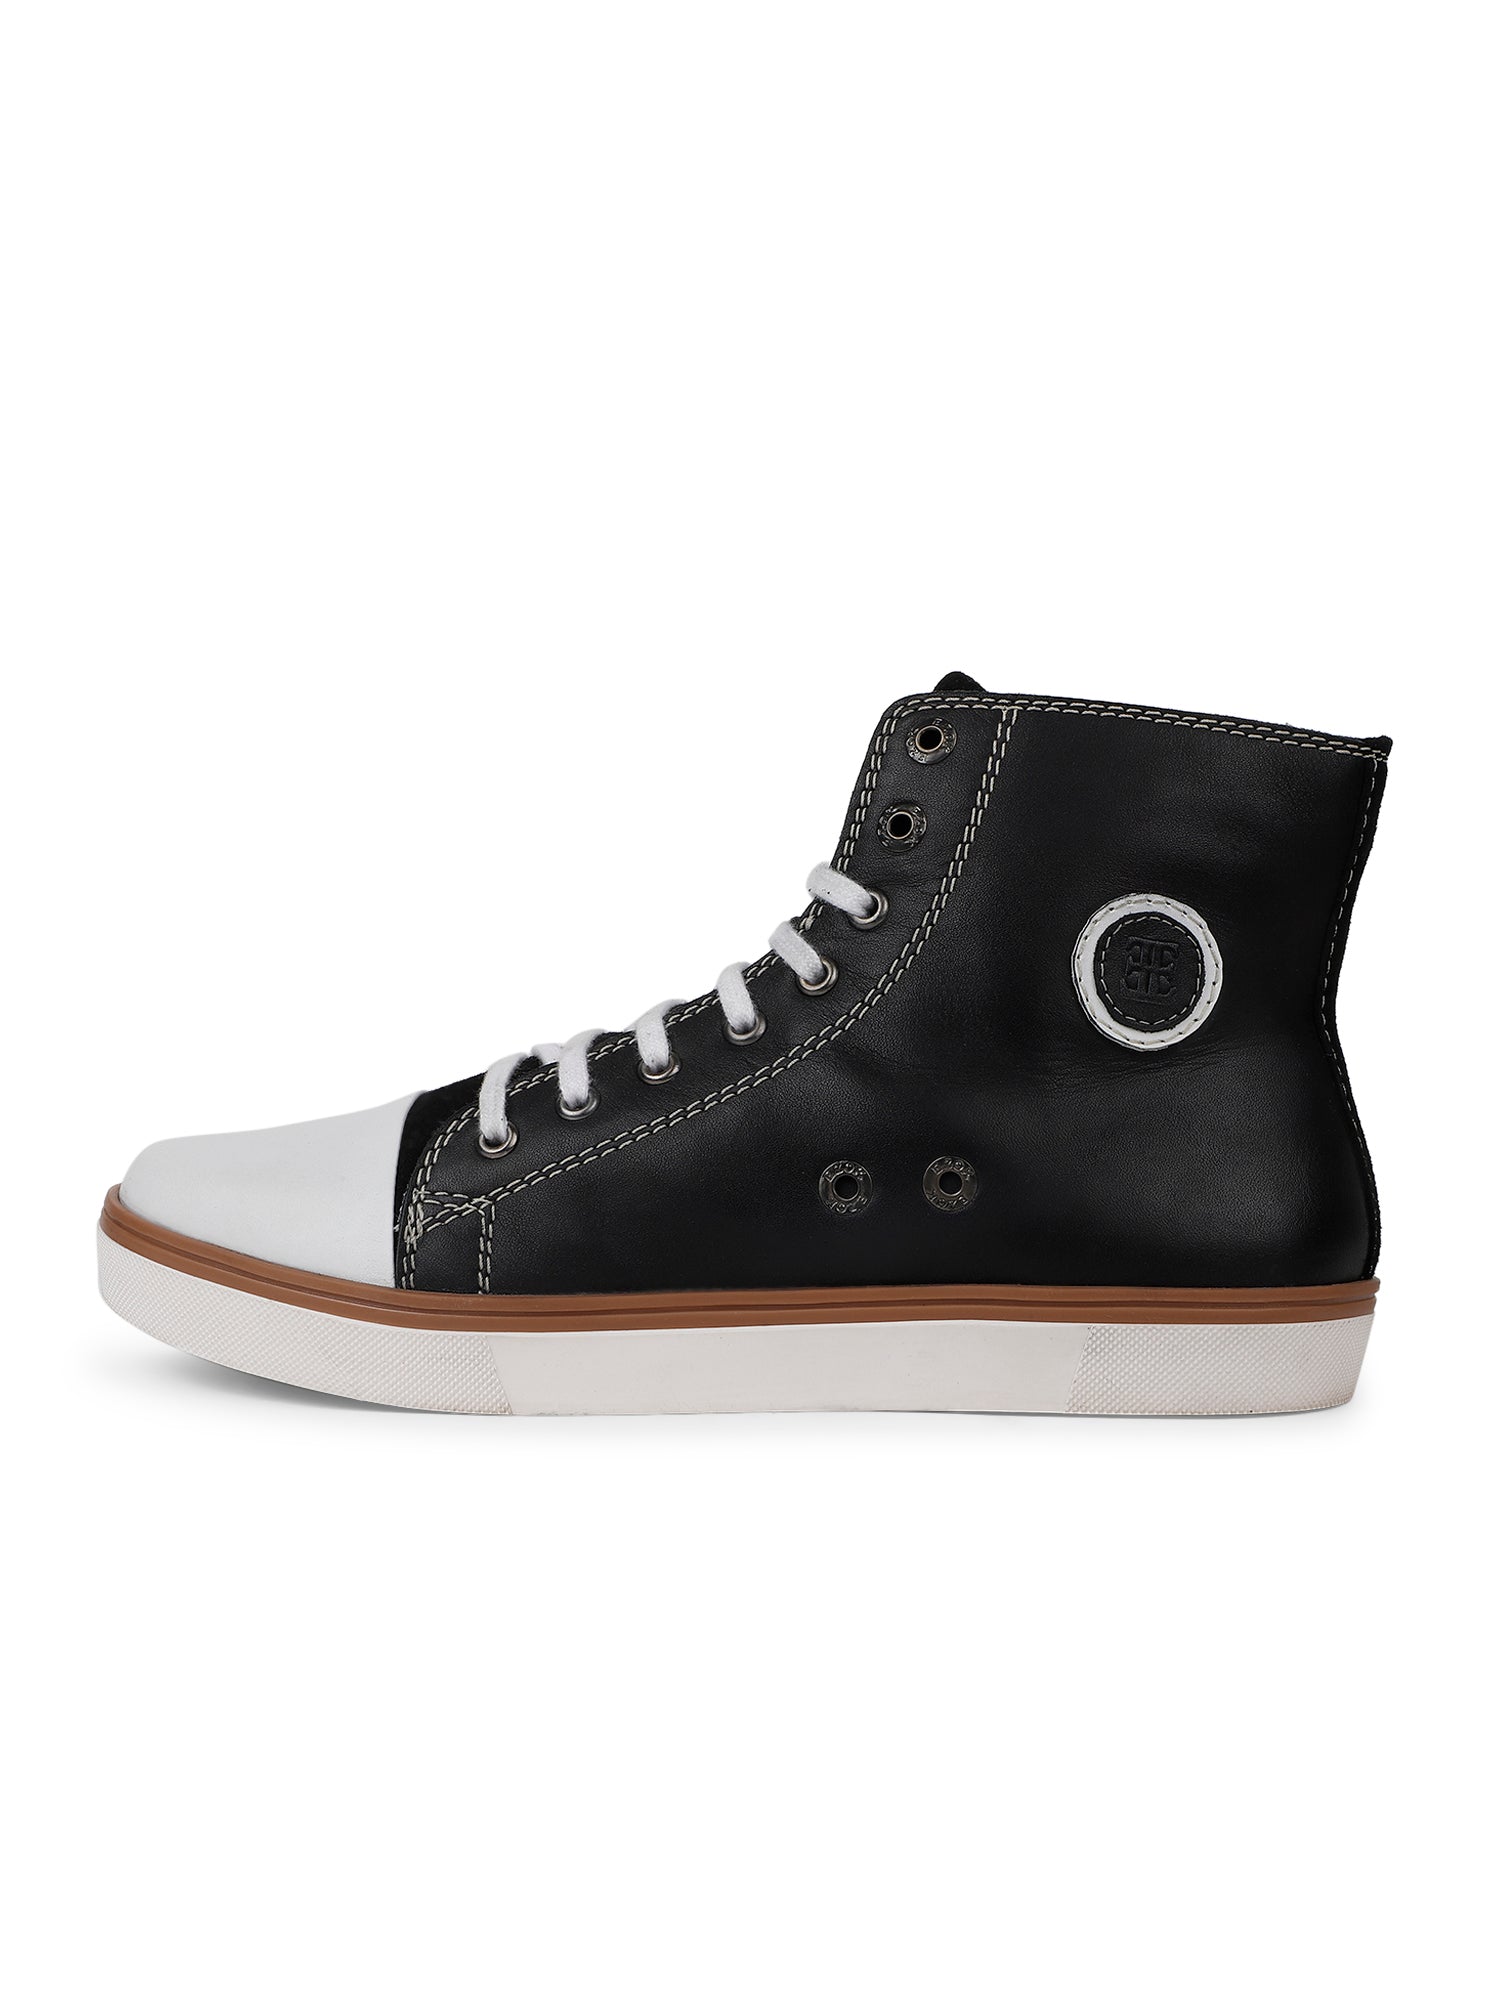 Ezok Black Lace-ups Leather Sneakers For Men